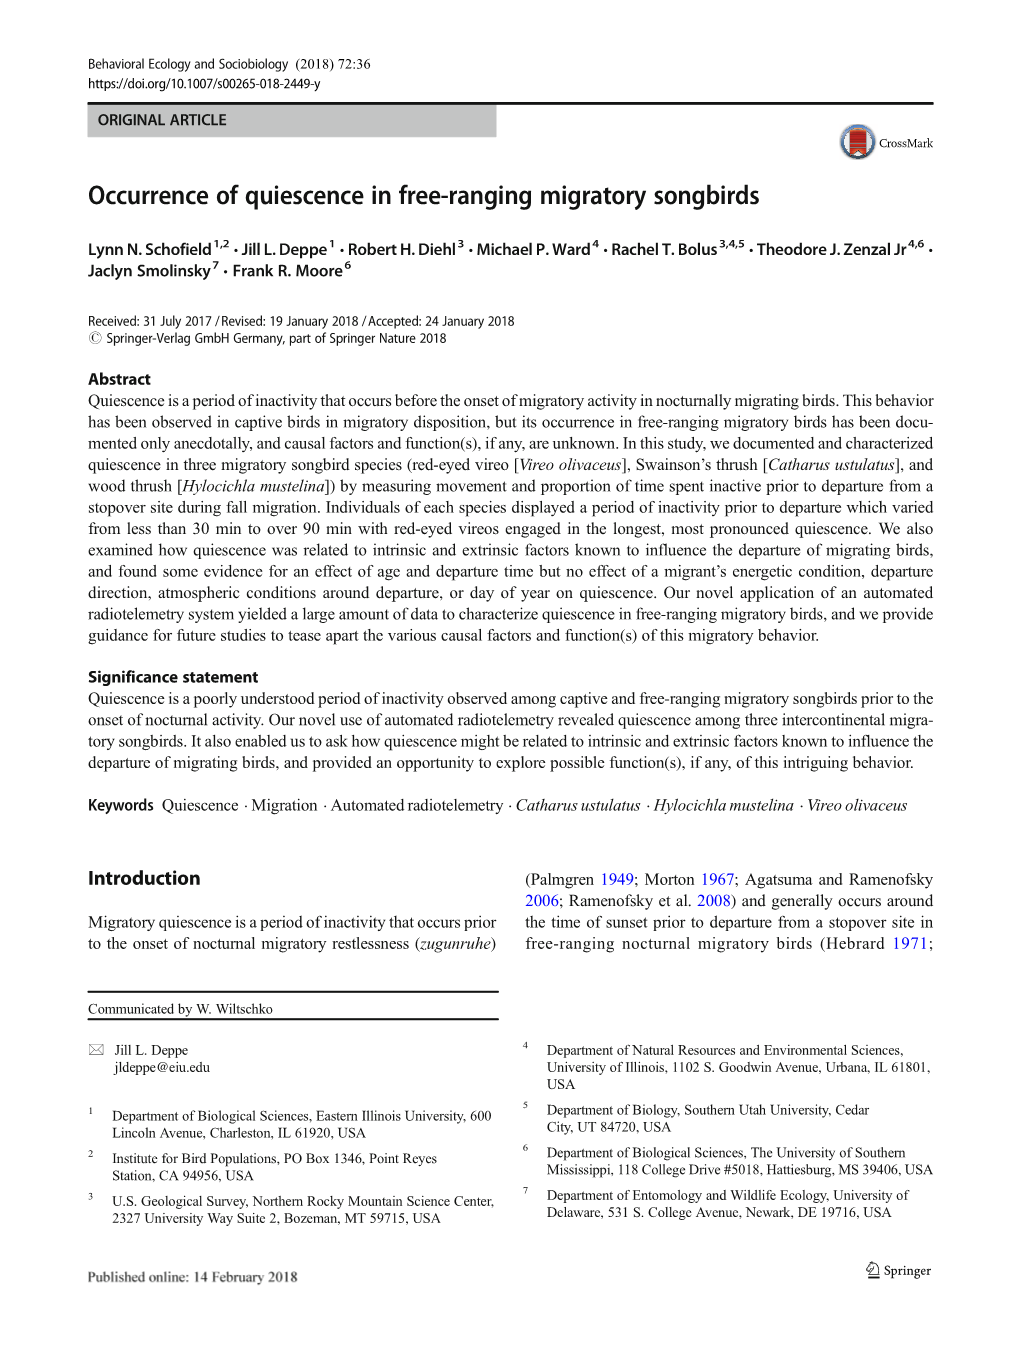 Occurrence of Quiescence in Free-Ranging Migratory Songbirds